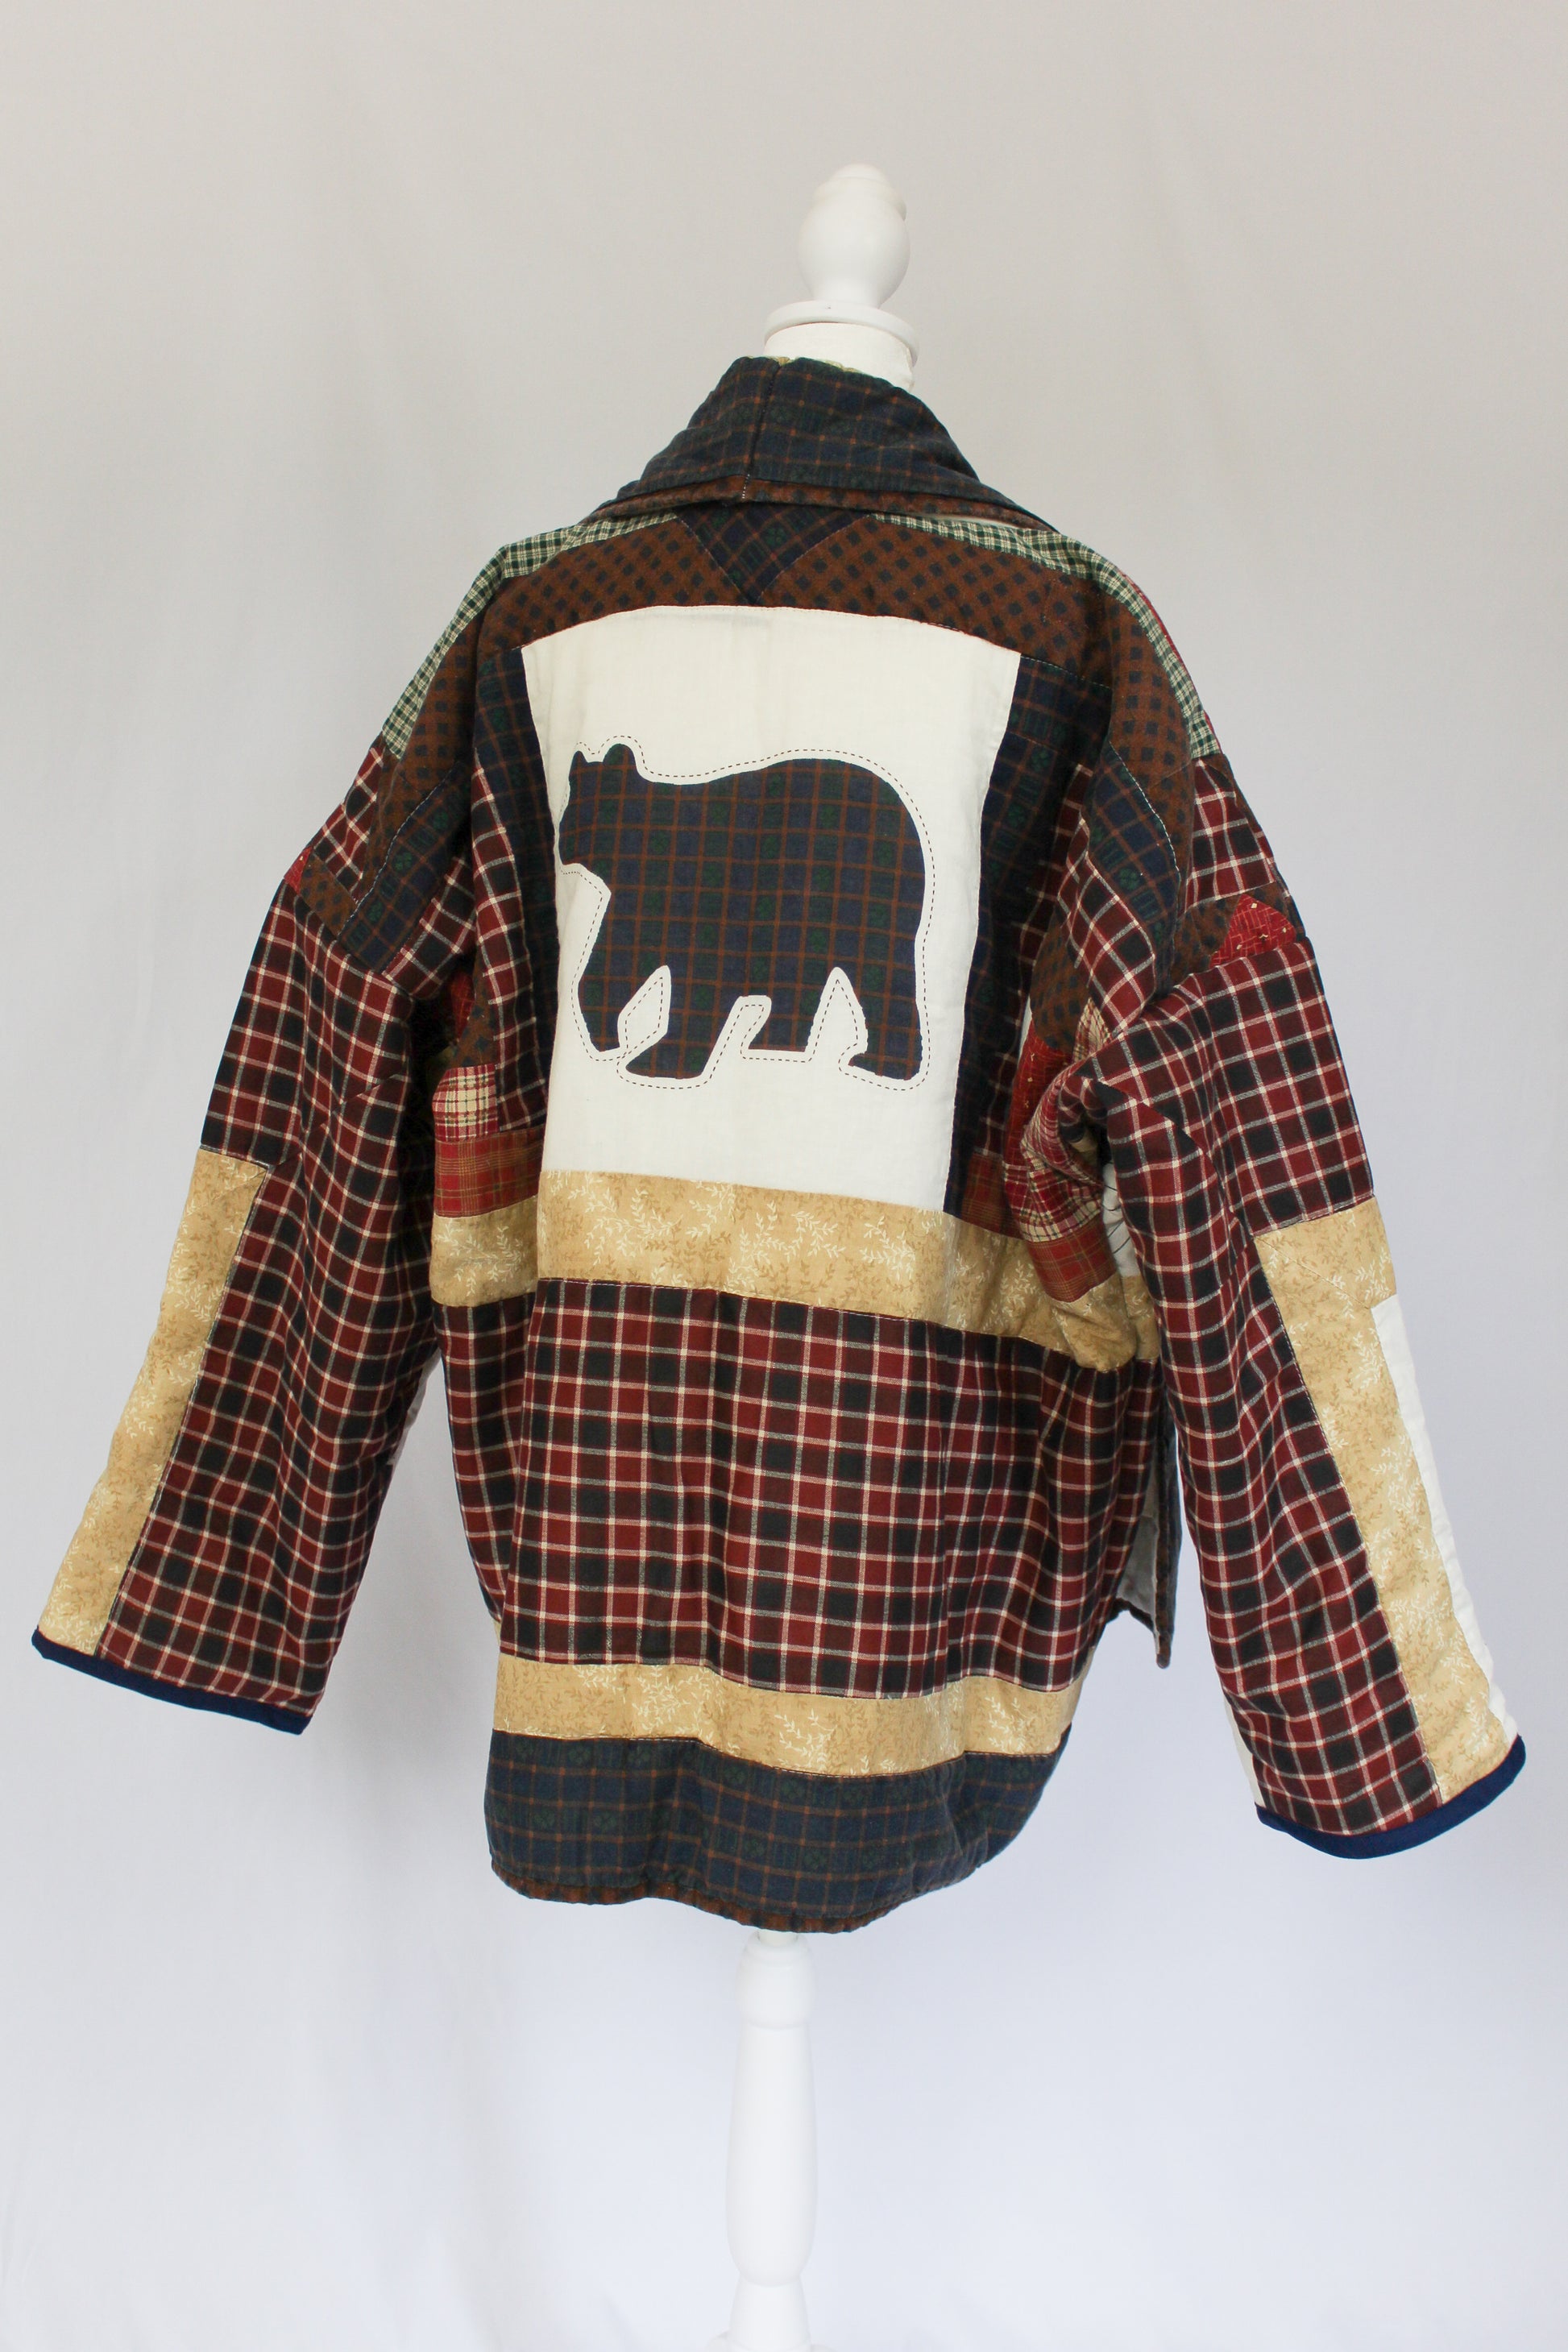 cabin themed jacket, jacket with bear, plaid quilt jacket